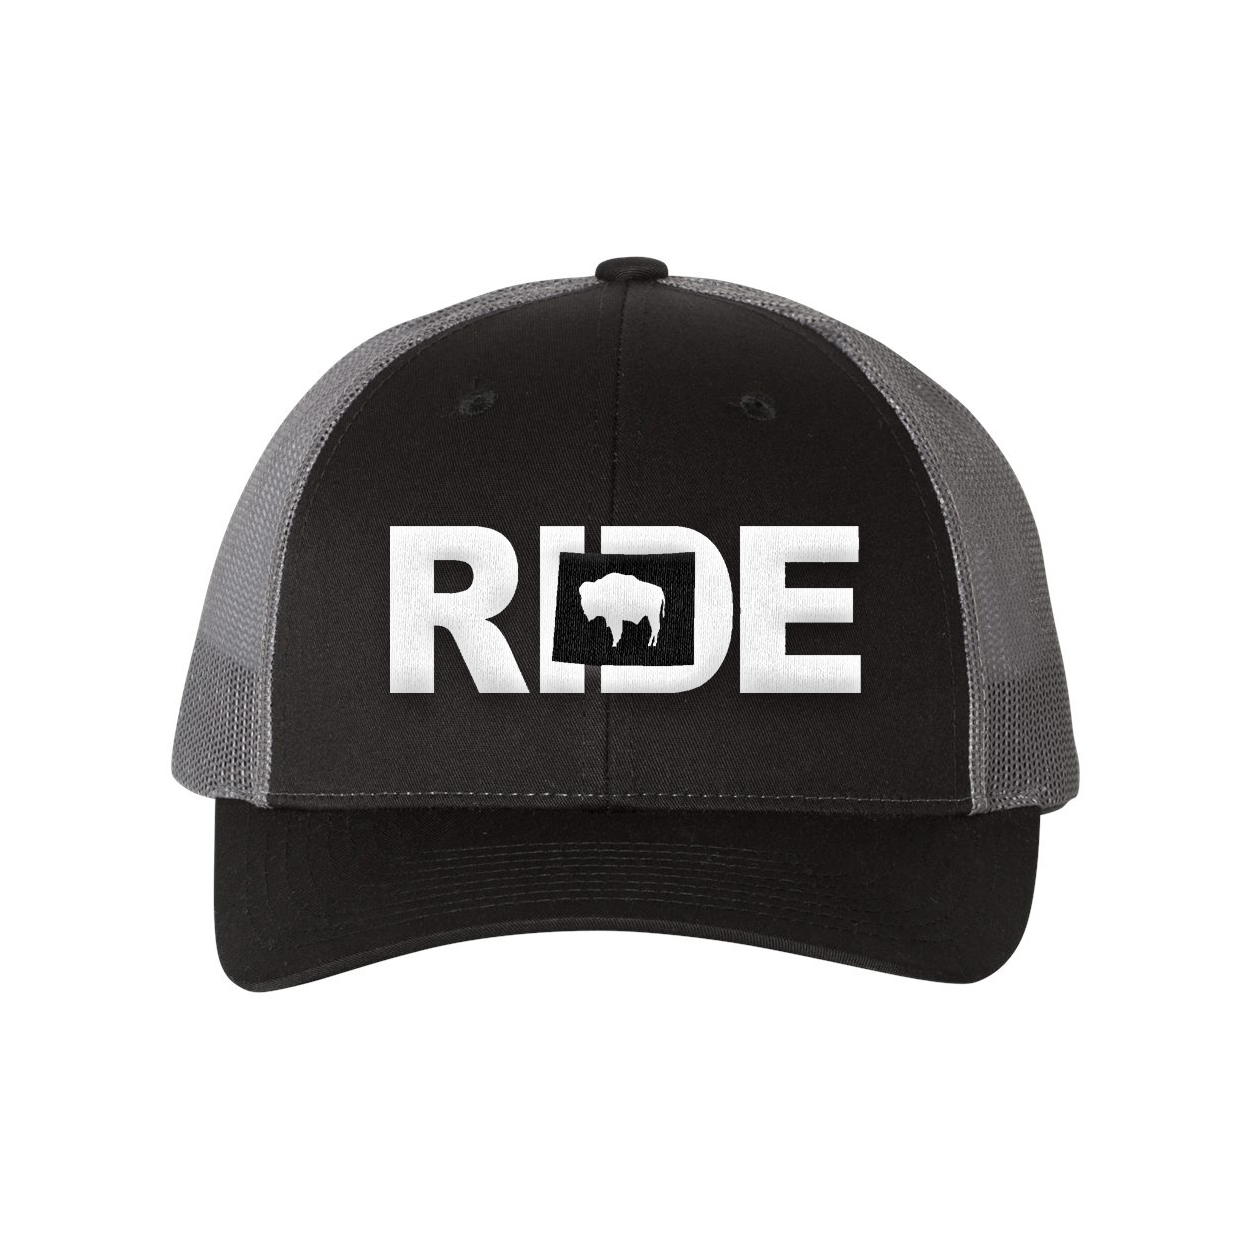 Ride Wyoming Classic Embroidered Snapback Trucker Hat Black/Gray